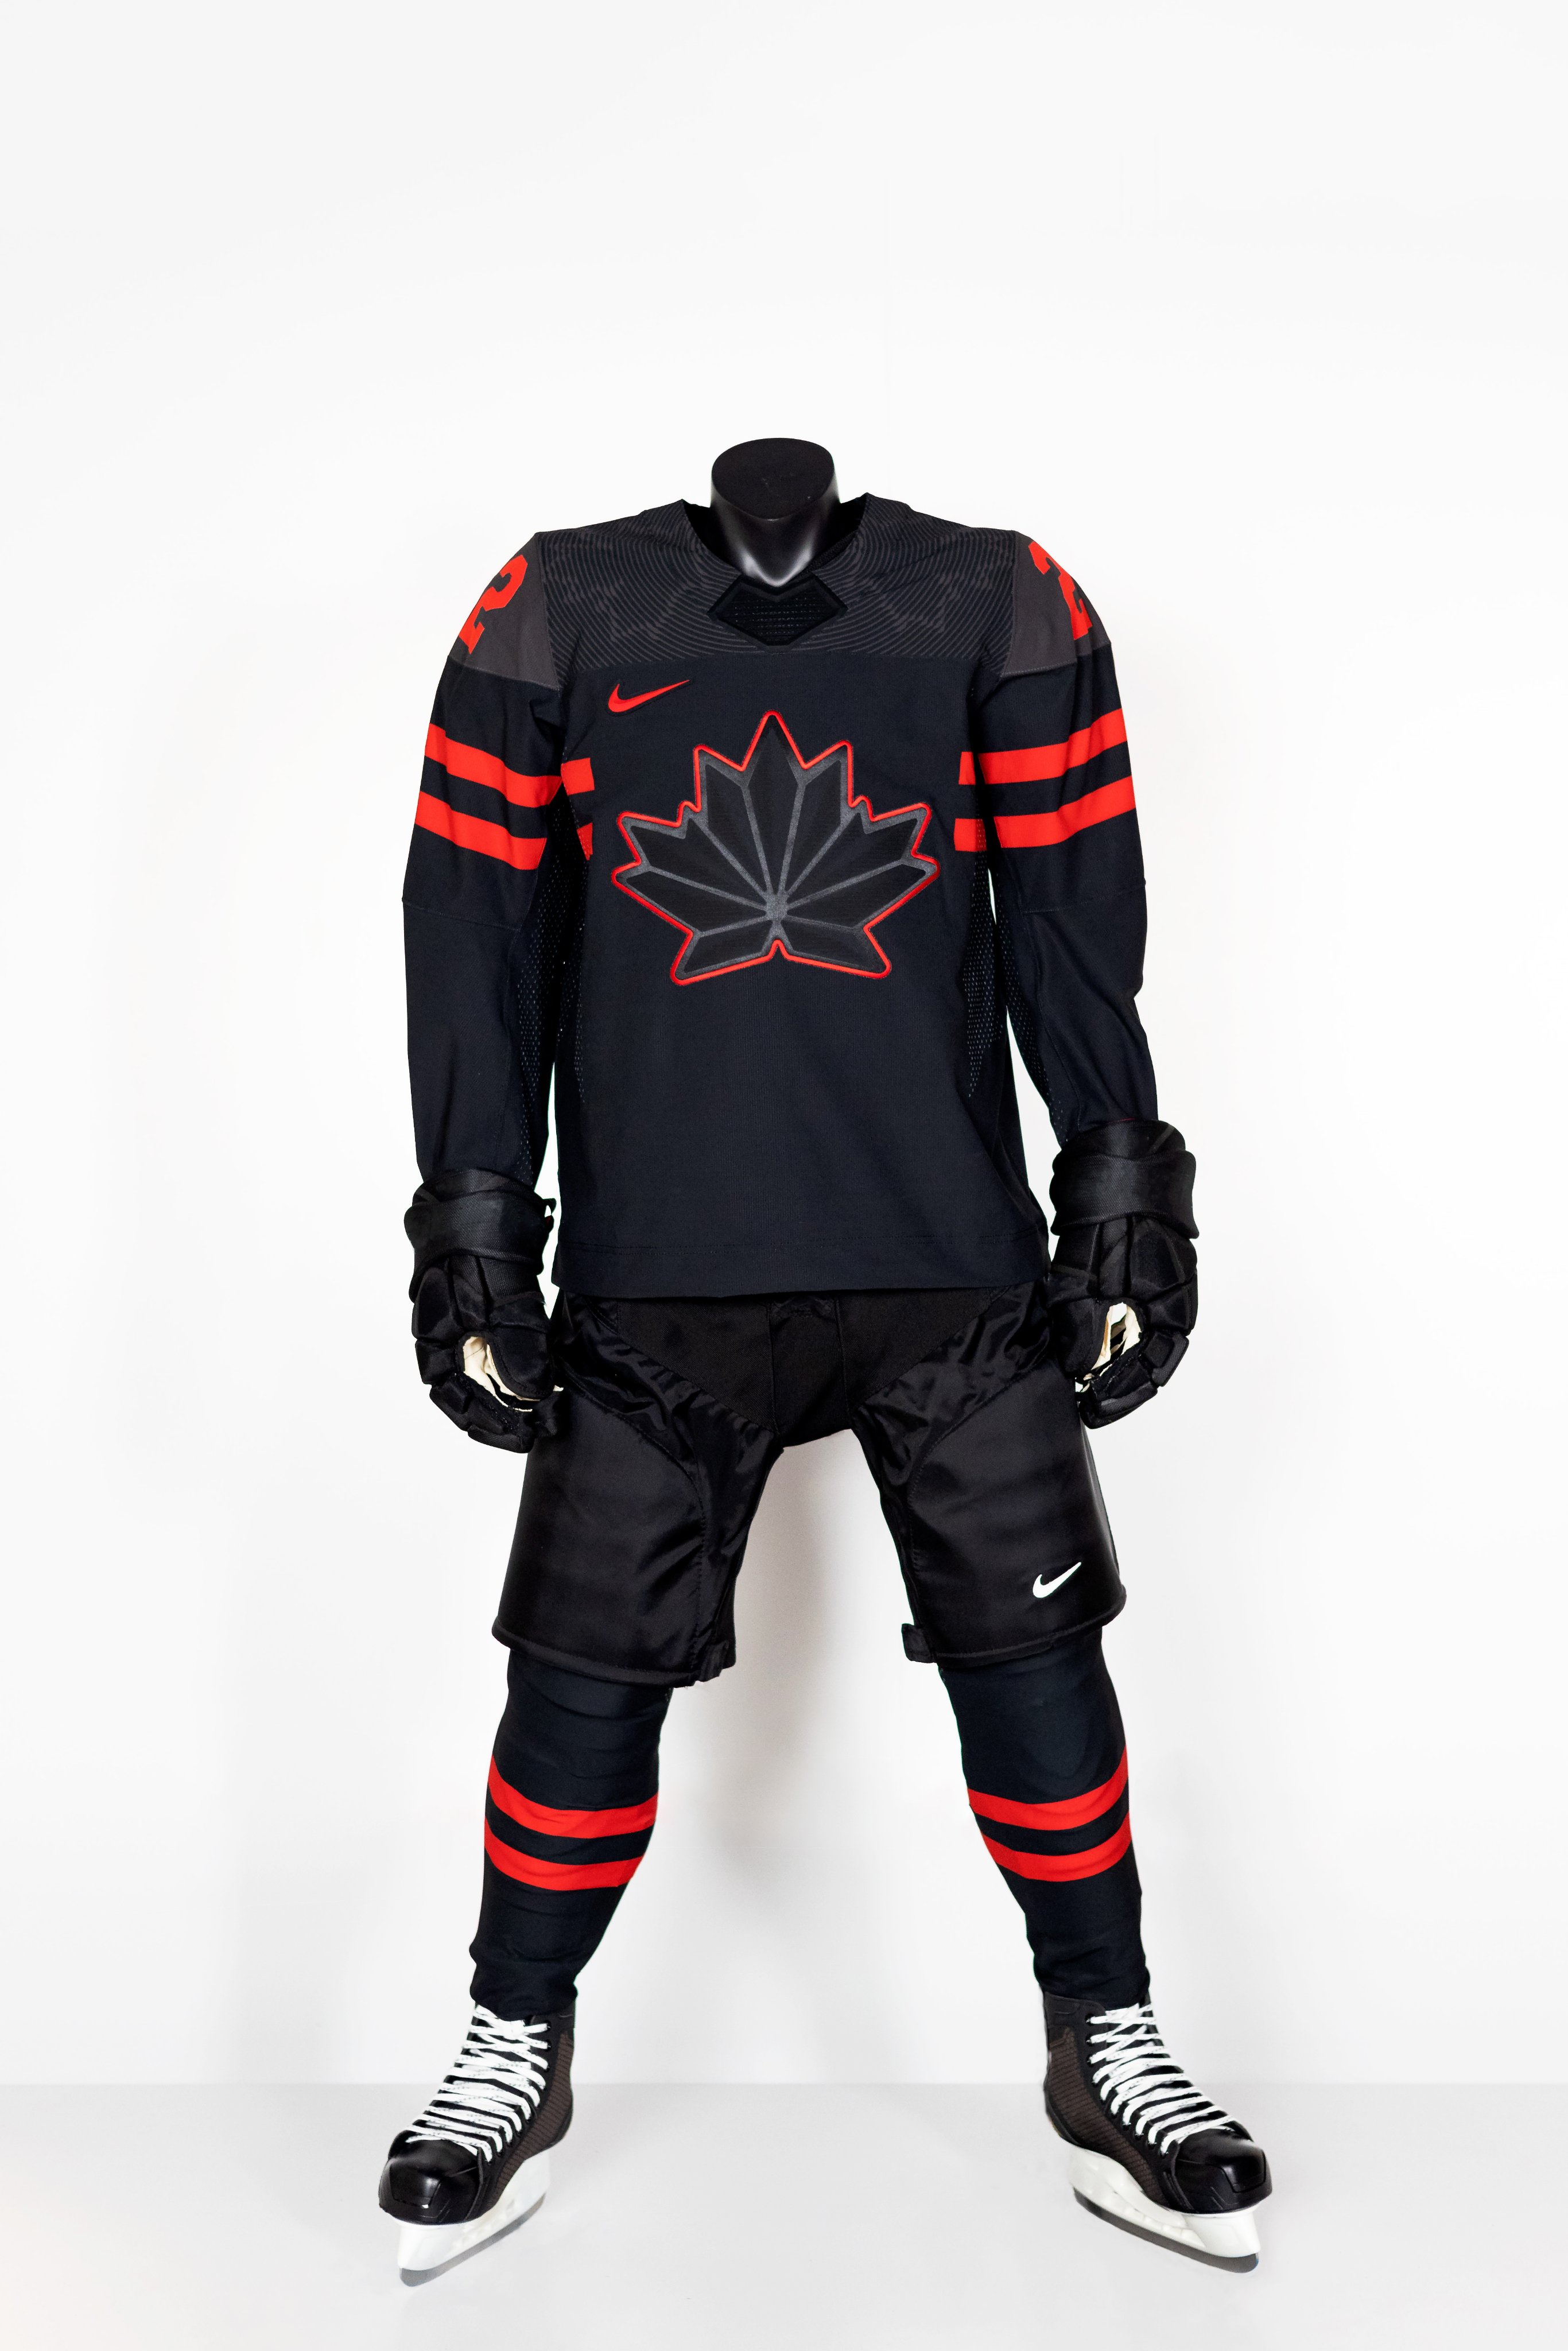 Is this the Team Canada Olympic jersey? (Photo)